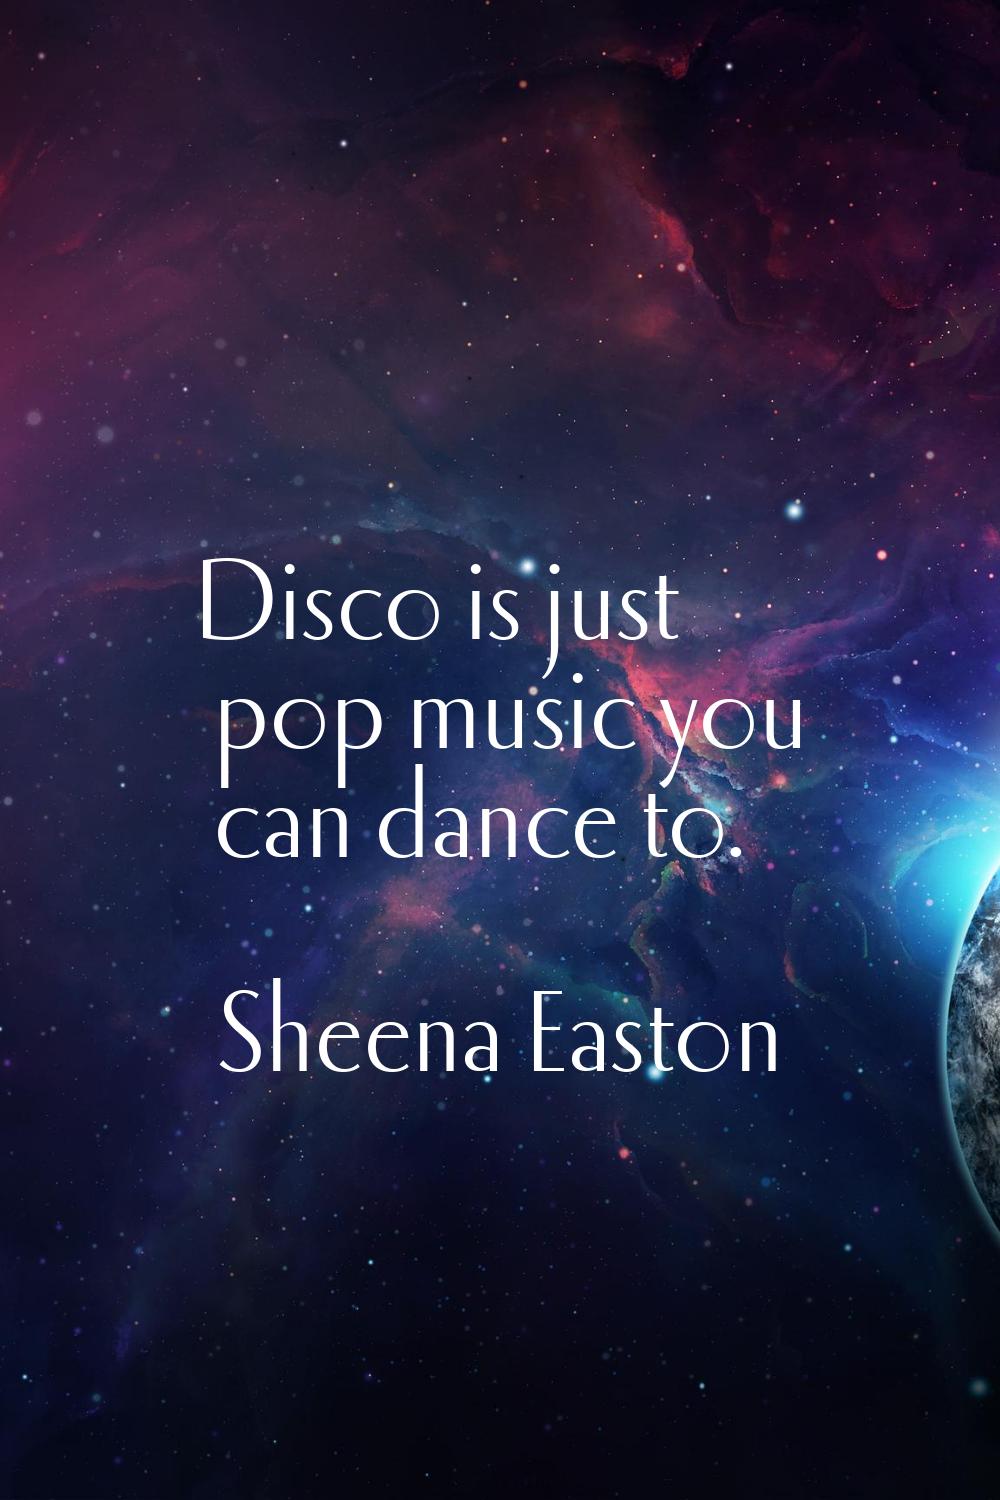 Disco is just pop music you can dance to.